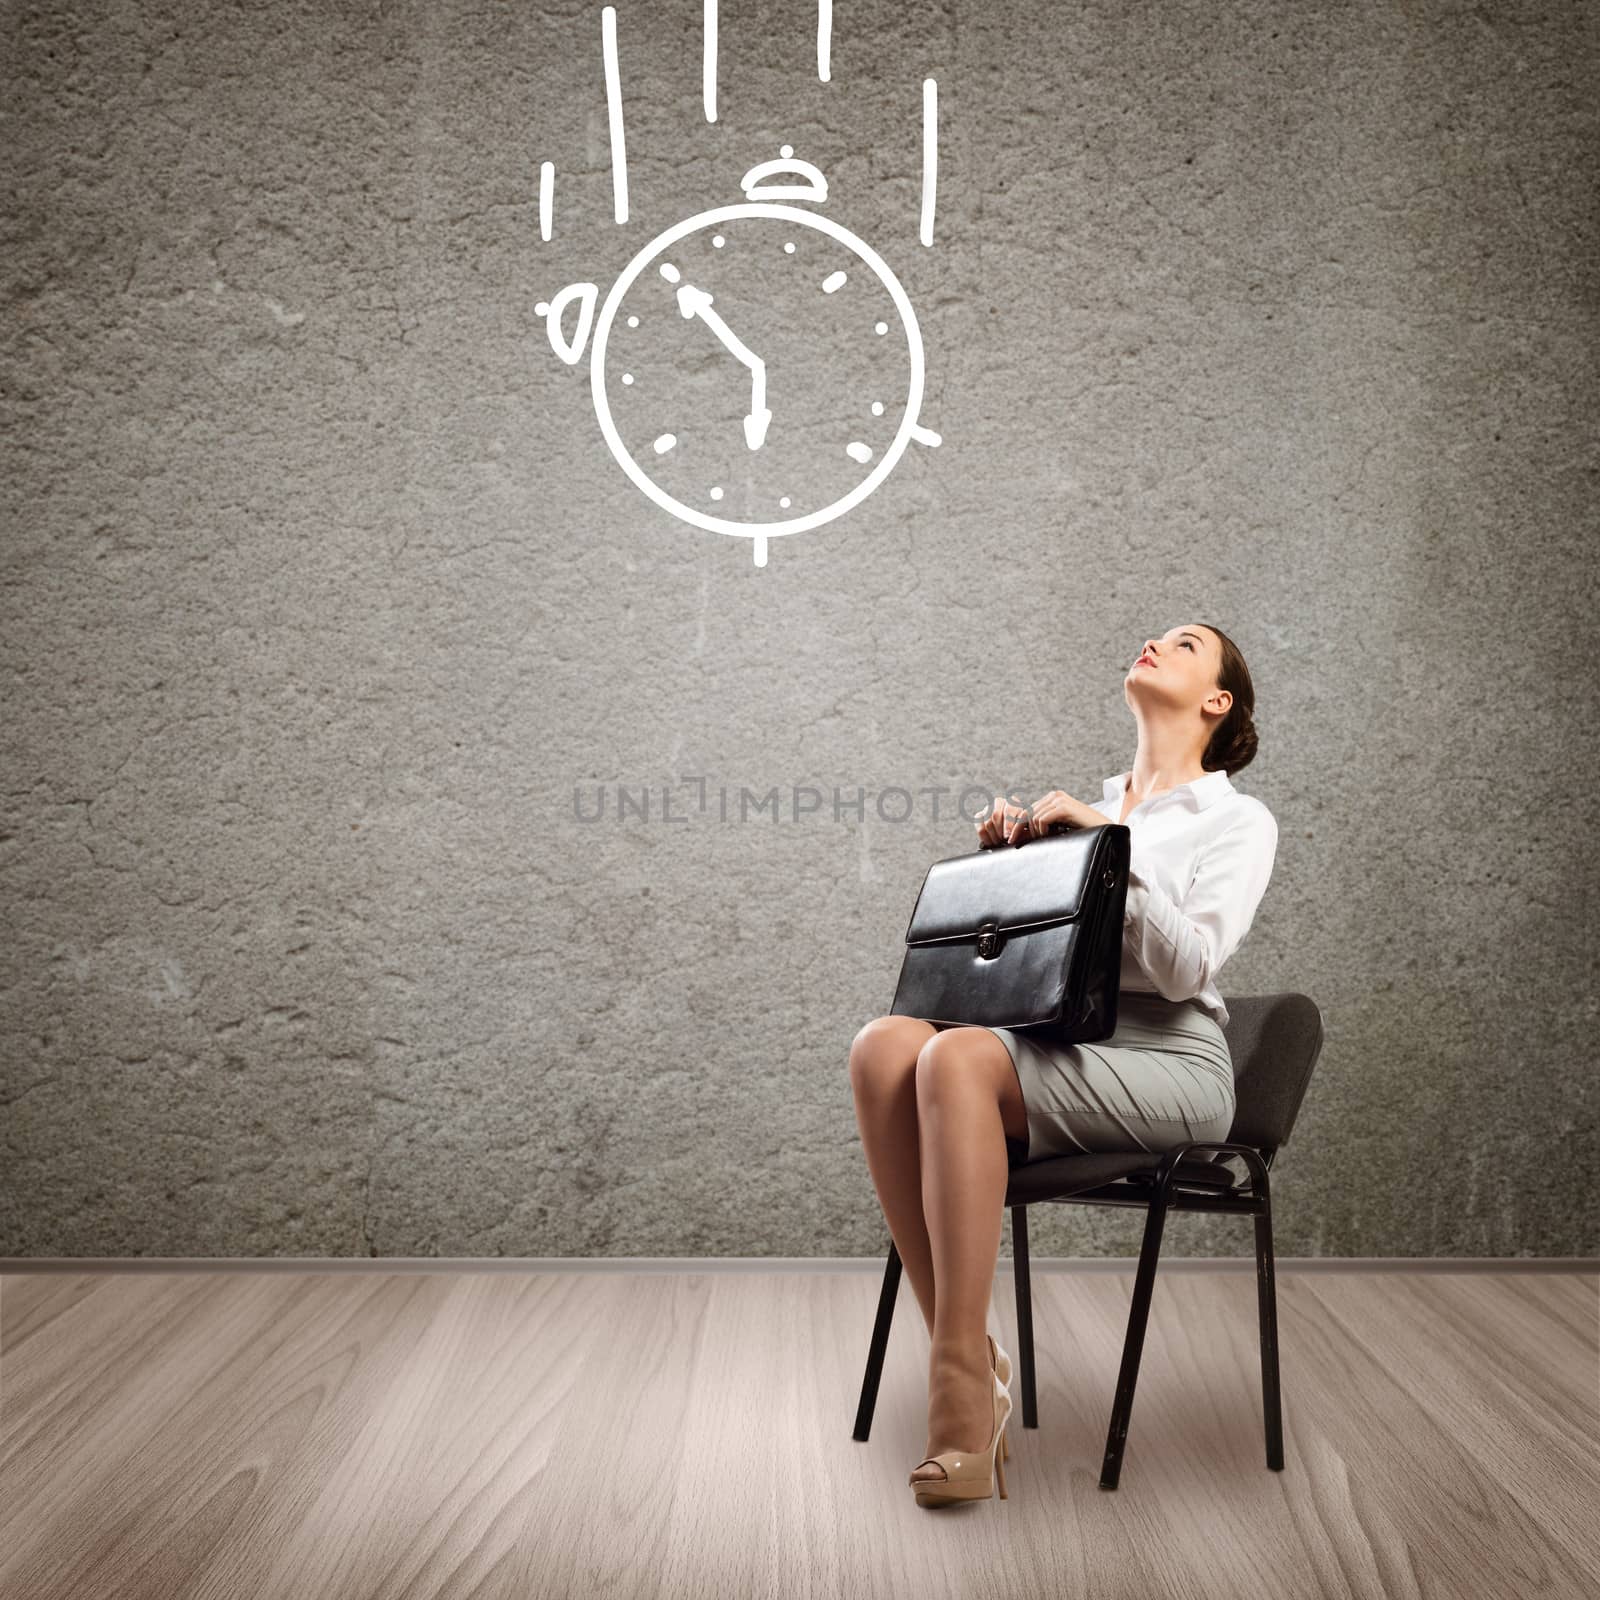 image of a young business woman looking at the sketched clock